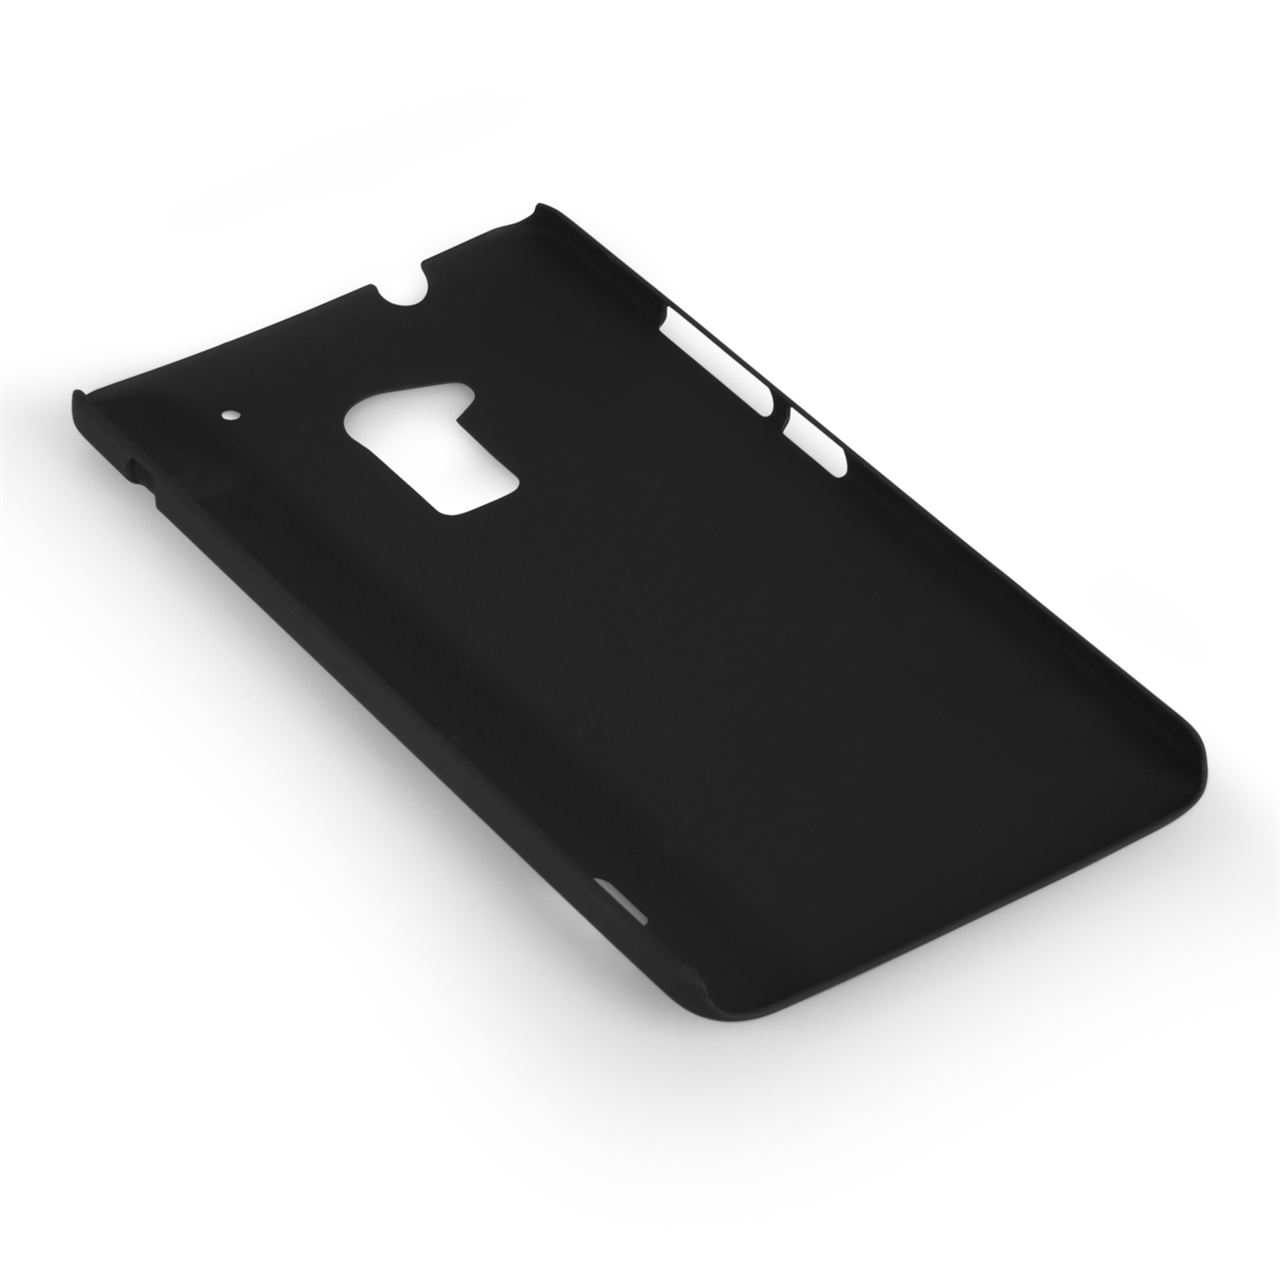 YouSave Accessories HTC One Max Hard Hybrid Case - Black